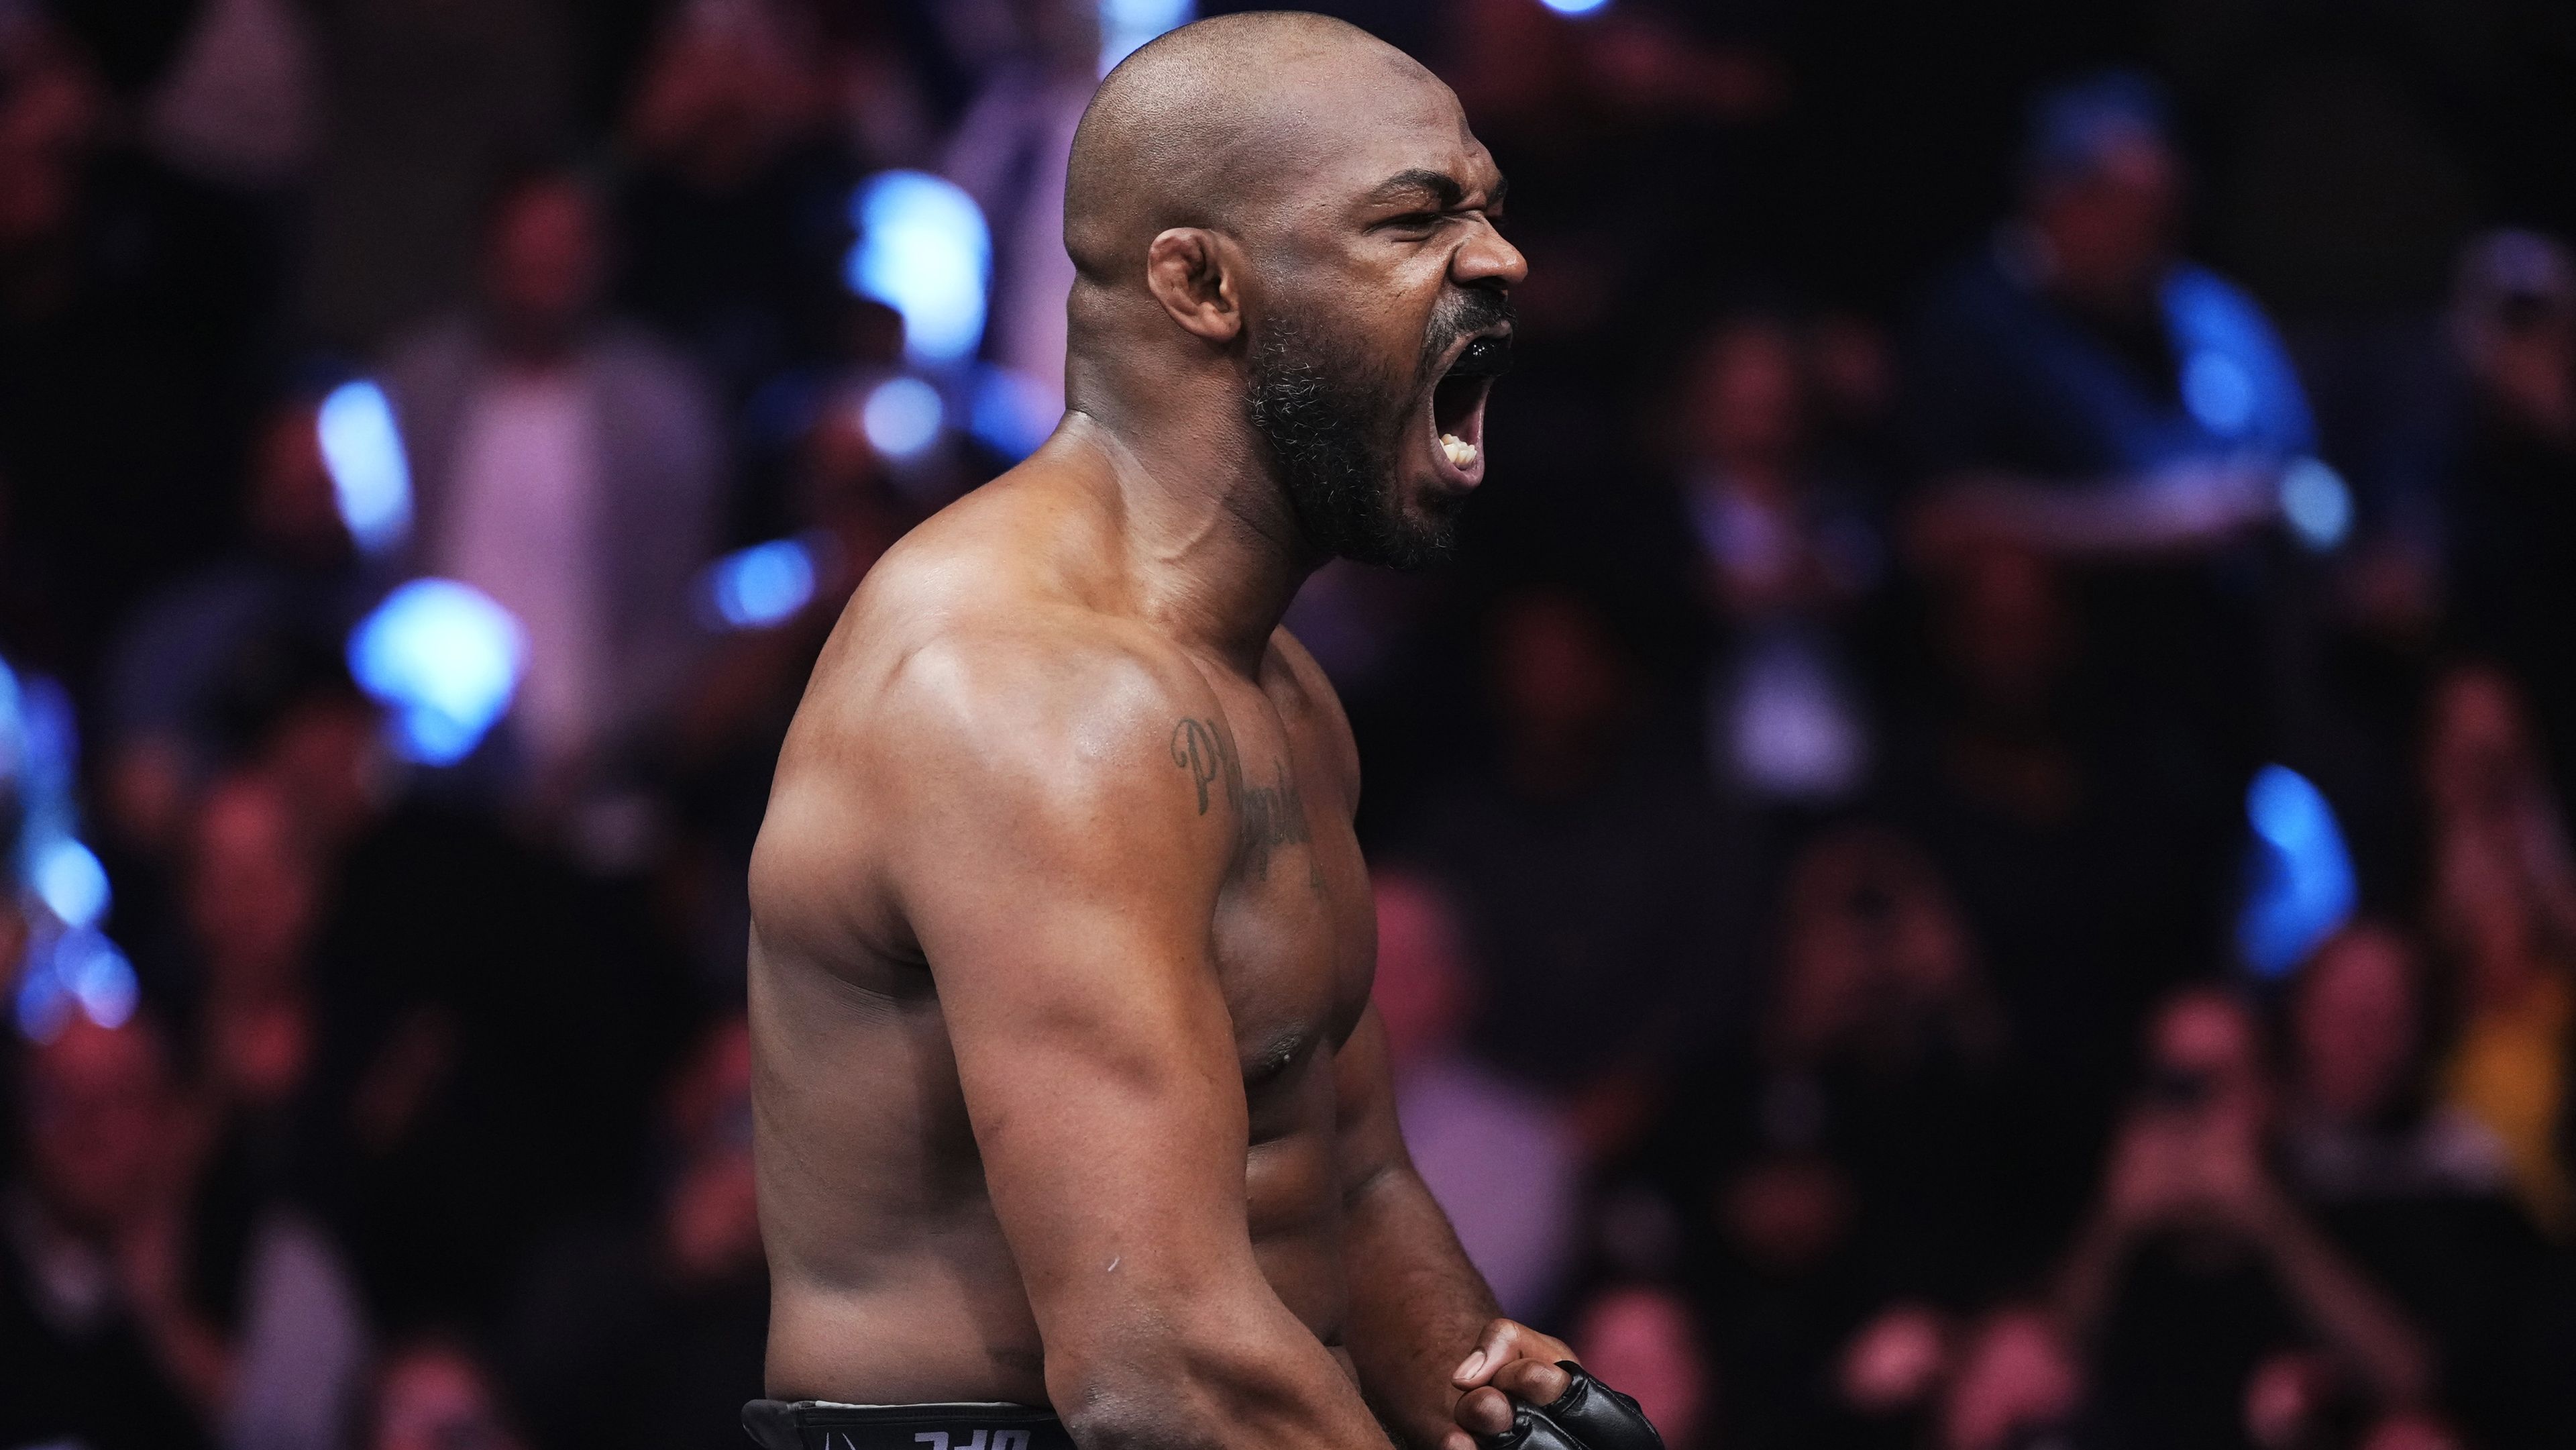 LAS VEGAS, NEVADA - MARCH 04: Jon Jones reacts to his win in the UFC heavyweight championship fight during the UFC 285 event at T-Mobile Arena on March 04, 2023 in Las Vegas, Nevada. (Photo by Jeff Bottari/Zuffa LLC via Getty Images)